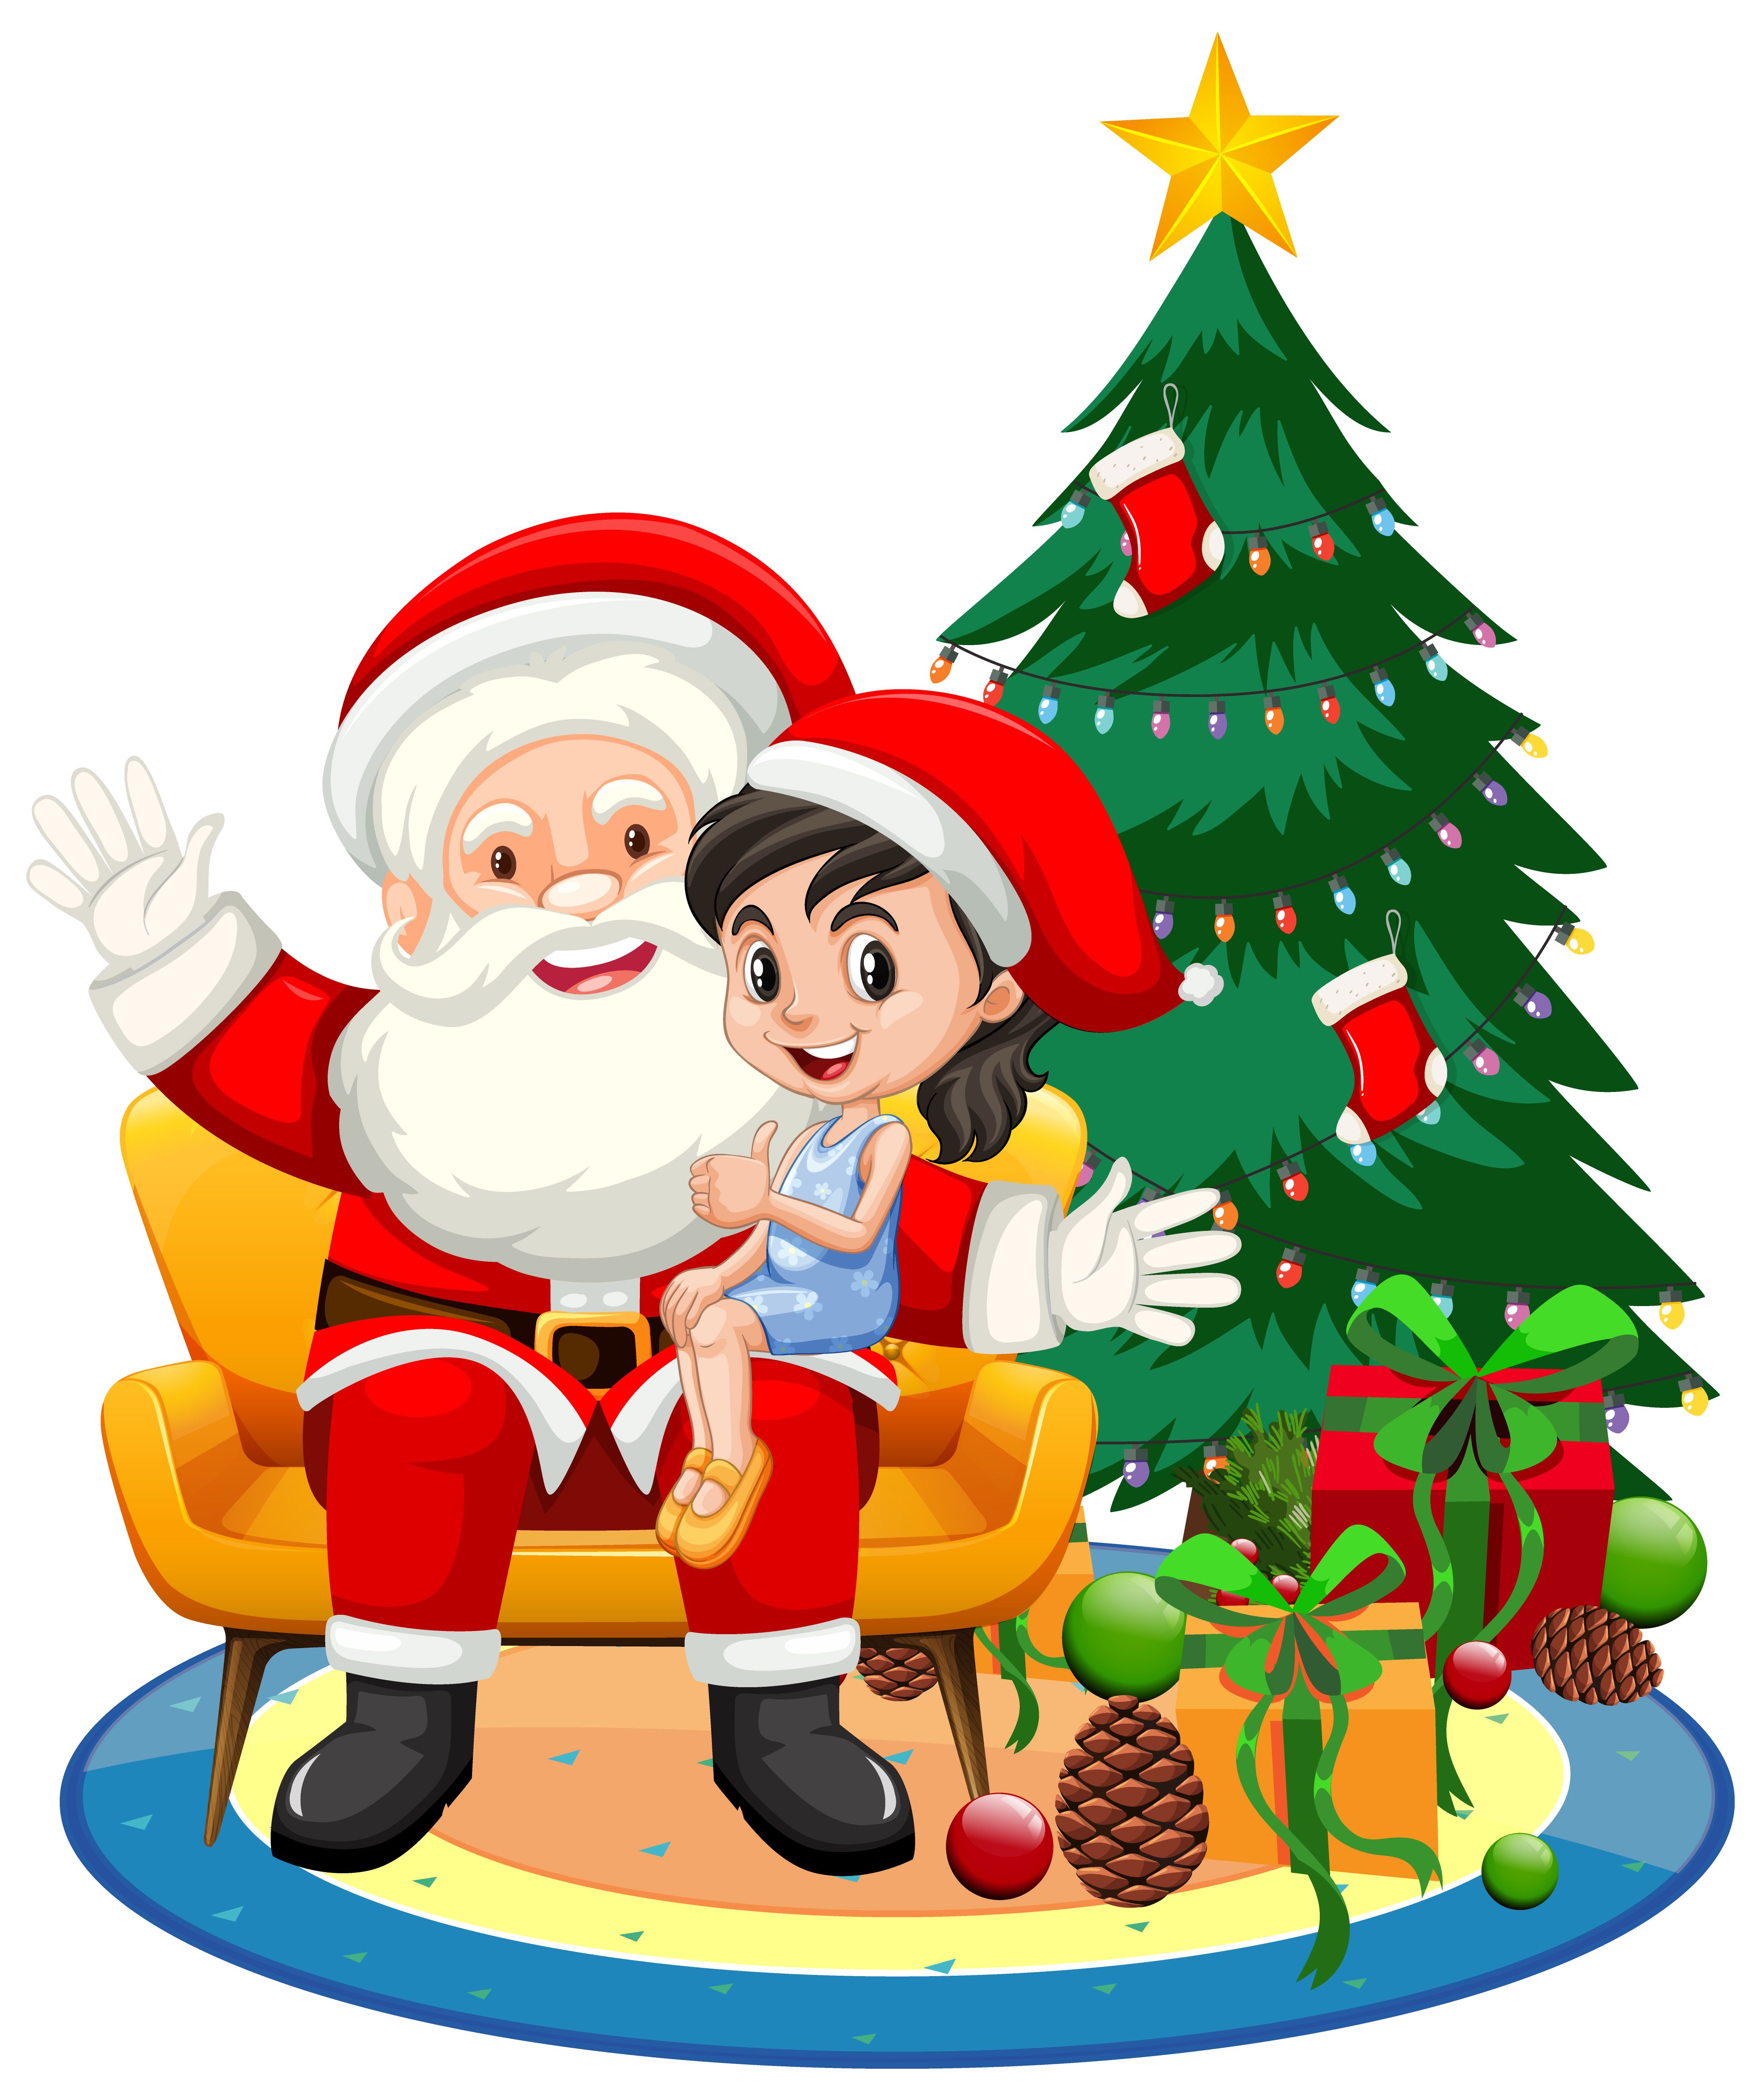 Santa Claus sitting on his lap with cute girl on white background Free Vectors, Clipart Graphics & Vector Art